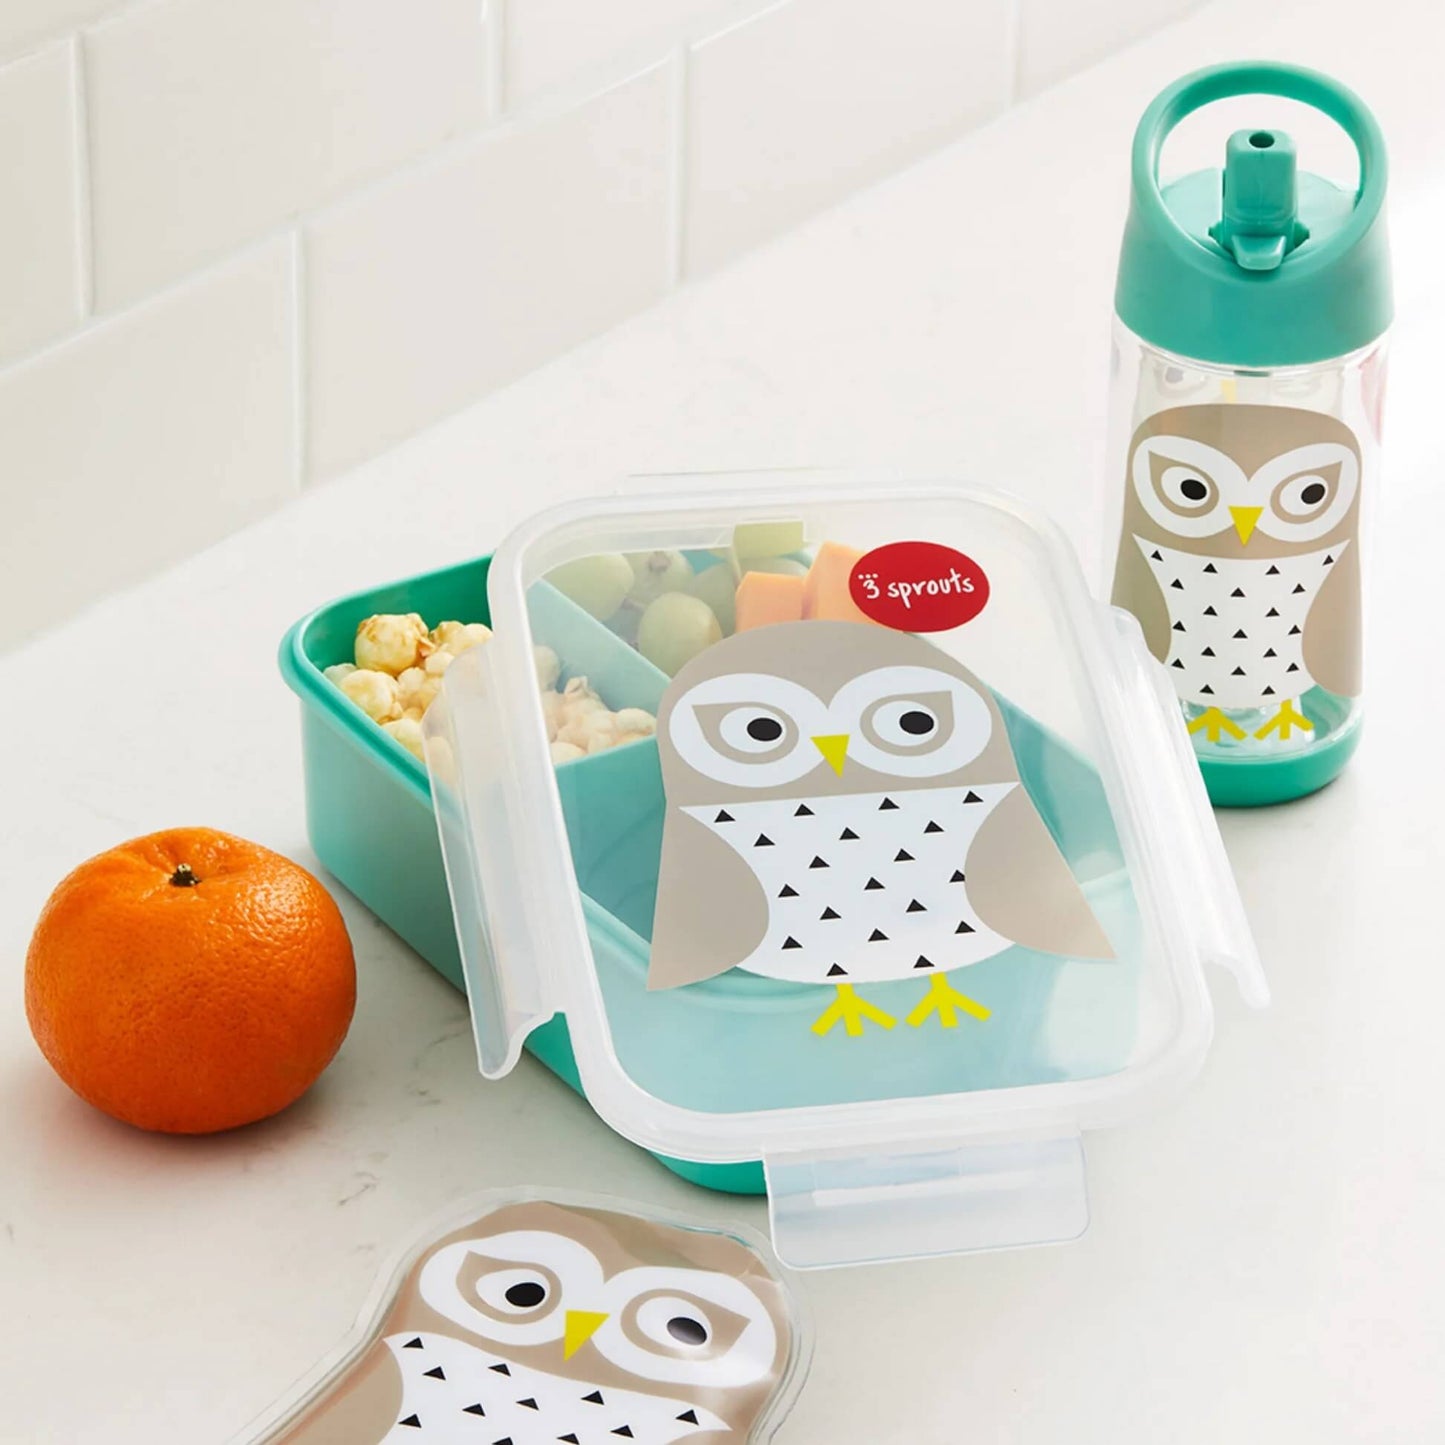 3 Sprouts Ice Pack (Owl)